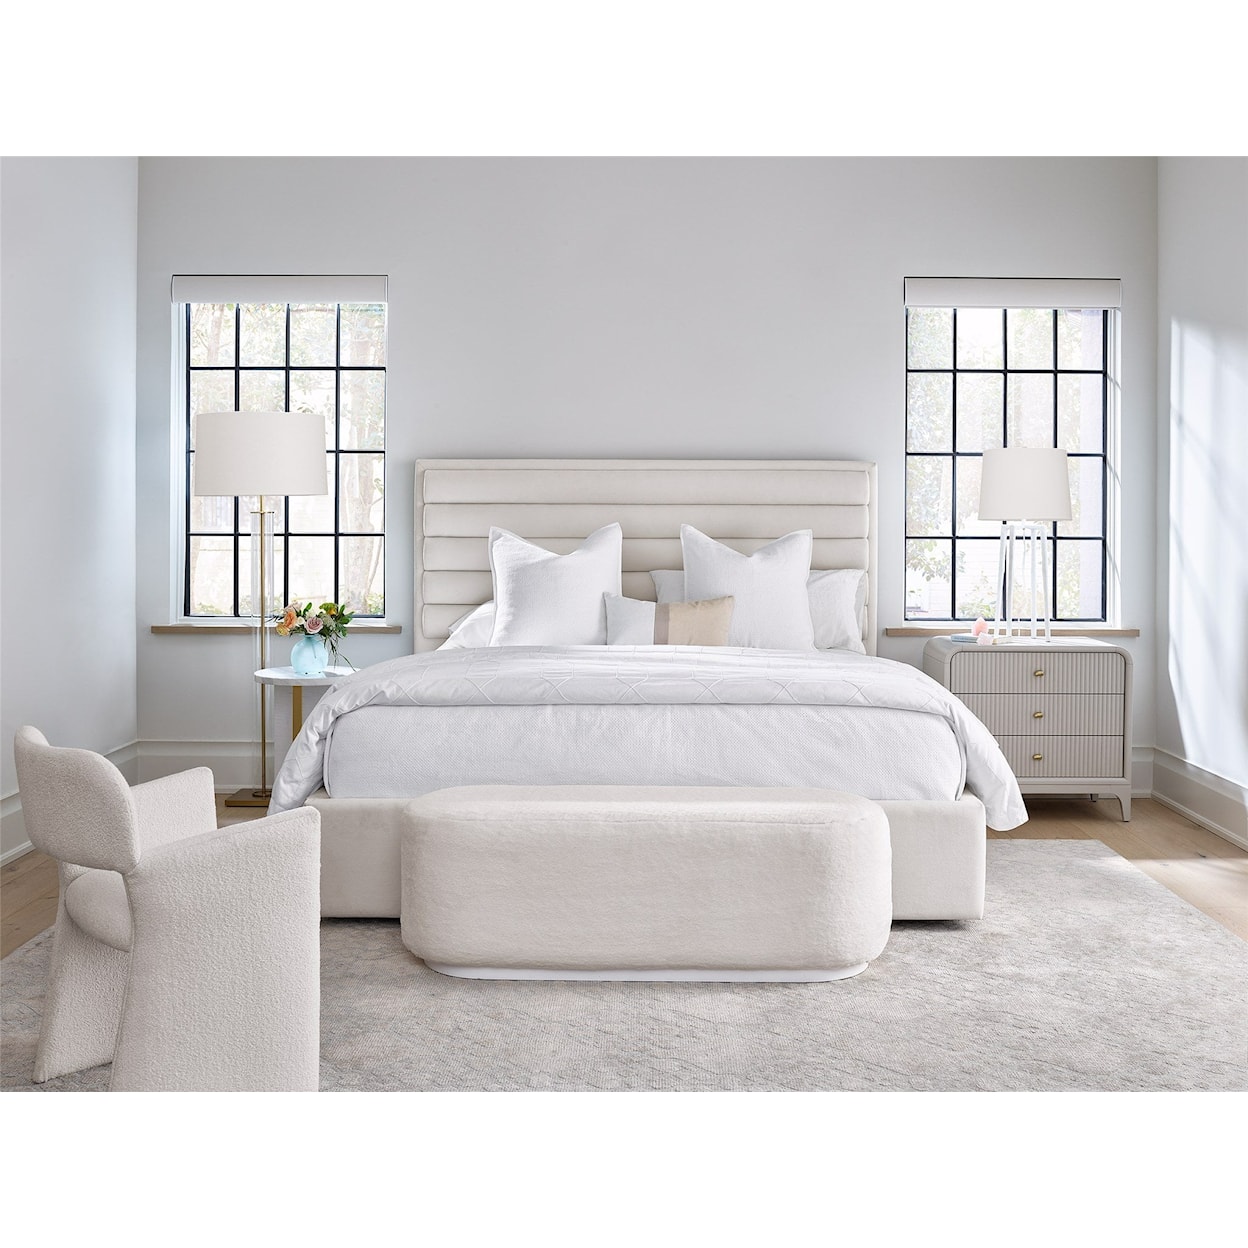 Universal Tranquility - Miranda Kerr Home Tranquility Upholstered Bed King